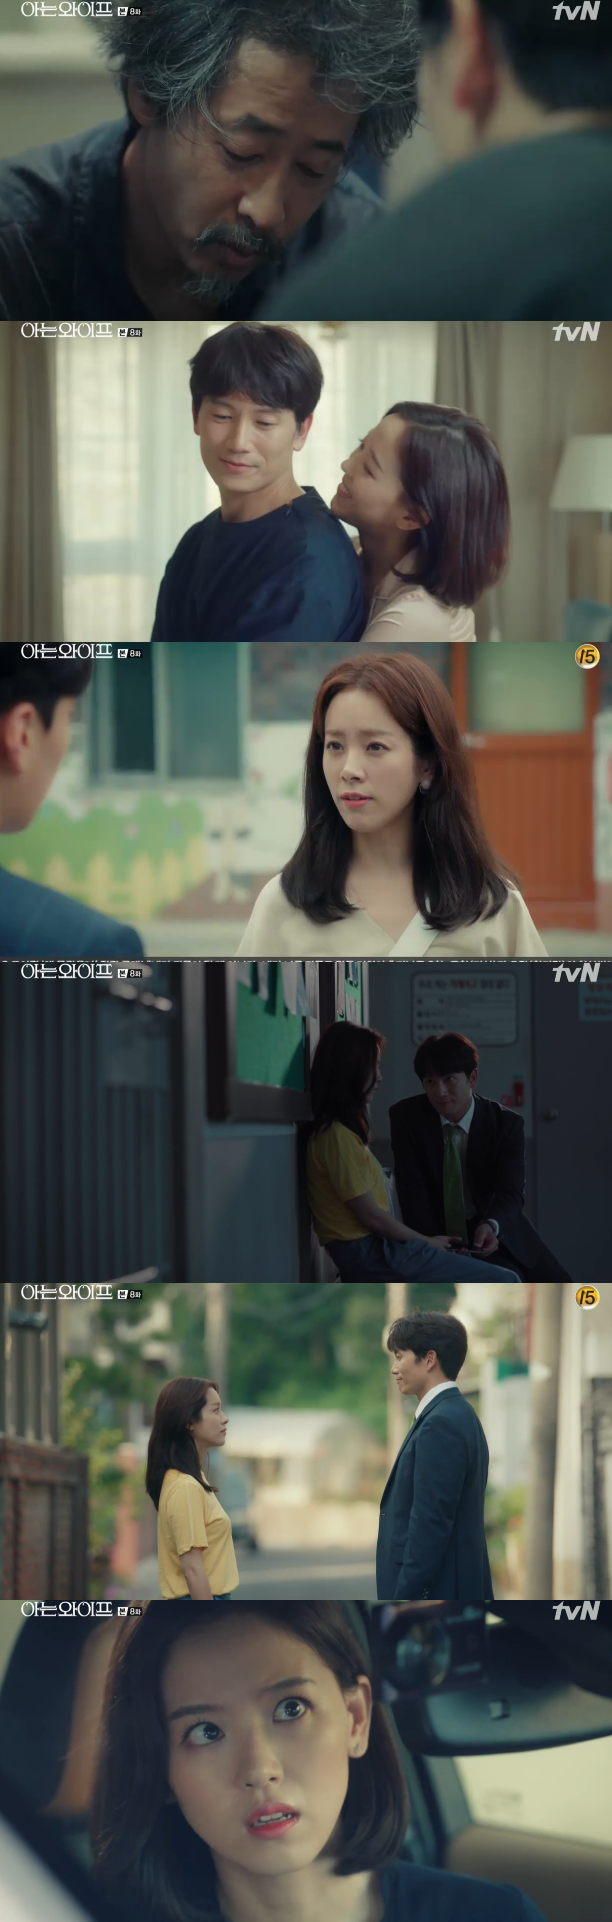 Kang Han-Na, a wife who knows, noticed Ji Sungs lieIn the TVN tree drama Knowing Wife, which was broadcast on the afternoon of the 23rd, Cha Ju-hyuk (Ji Sung) was shown searching for the mother of Seo Woo Jin (Han Ji-min).Cha Ju-hyuk, who had seen Seo Woo Jin (Han Ji-min) and Yoon Jong-hoo (Jang Seung-jo) dating earlier, headed to the tollgate that let him go to the past with a 500-won coin produced in 2006, but nothing appeared.He asked for a homeless man who gave him a coin and asked him to go back to the past, saying he regretted pushing Seo Woo Jin.But the homeless man said, I do not have a run. I was so desperate then, and now why do you do this?Cha Ju-hyuk, who turned around a lot, lamented his thoughts thinking of Seo Woo Jin and then threw the coin into the Han River.The next day, Cha Ju-hyuk began his day with a brighter look, getting up early before work, turning the cleaner, and working vigorously at the company.When company colleagues questioned the relationship between Seo Woo Jin and Yoon Jong Hoo, they stopped it.Yoon Jong-hoo said he should help Seo Woo Jin, who is preparing for his fathers birthday, and he replaced him with night work.The day was bright: Seawo Jin, who woke up, found her mother (Lee Jung-eun) with dementia, but was not home; she had disappeared suddenly.Seo Woo Jin had been searching for his mother until late; Yoon Jong-hu, who had been brought to the dinner party, was worried when Seo Woo Jin continued not to be contacted.Cha Ju-hyuk, who saw this appearance, regretted his actions that he had never taken the anniversary of his father Seo Woo Jin in the reality before he changed, and found the house of Seo Woo Jin.I quietly greeted the deceased in a private voice, then pressed the bell and avoided my seat.He took the missing Seo Woo Jin to the police station and reported his runaway, and waited for news at the police station together.Cha Ju-hyuk lies to Lee Hee-won (Kang Han-Na Boone) that something happened to the company and spends a full night by the side of Seo Woo Jin.The mother of Seo Woo Jin, who had only found it through a social media report, was serving food: where she served together when her husband was alive; the relieved two walked along the road together.It was a way of dating in real life before it changed.Cha Ju-hyuk, who was walking on the road, did not reveal his name and said, Why did not I do better after he left? He said, I regret, I am sorry and I miss you.Seo Woo Jin cheered, I hope that word is delivered to him.The mother of Seo Woo Jin called Cha Ju-hyuk on her daughters mobile phone and asked, The West of tea, lets eat and go.Coincidentally, it was Lee Hee-won who got this call; embarrassed by the sudden words, Lee Hee-won searched Cha Ju-hyuks clothes and cars.In the car, Cha Ju-hyuks record of searching for the mother of Seo Woo Jin together remained in the navigation and black box.On the other hand, tvN Knowing Wife is broadcast every Wednesday and Thursday at 9:30 pm.Photo TVN Broadcast Screen Capture